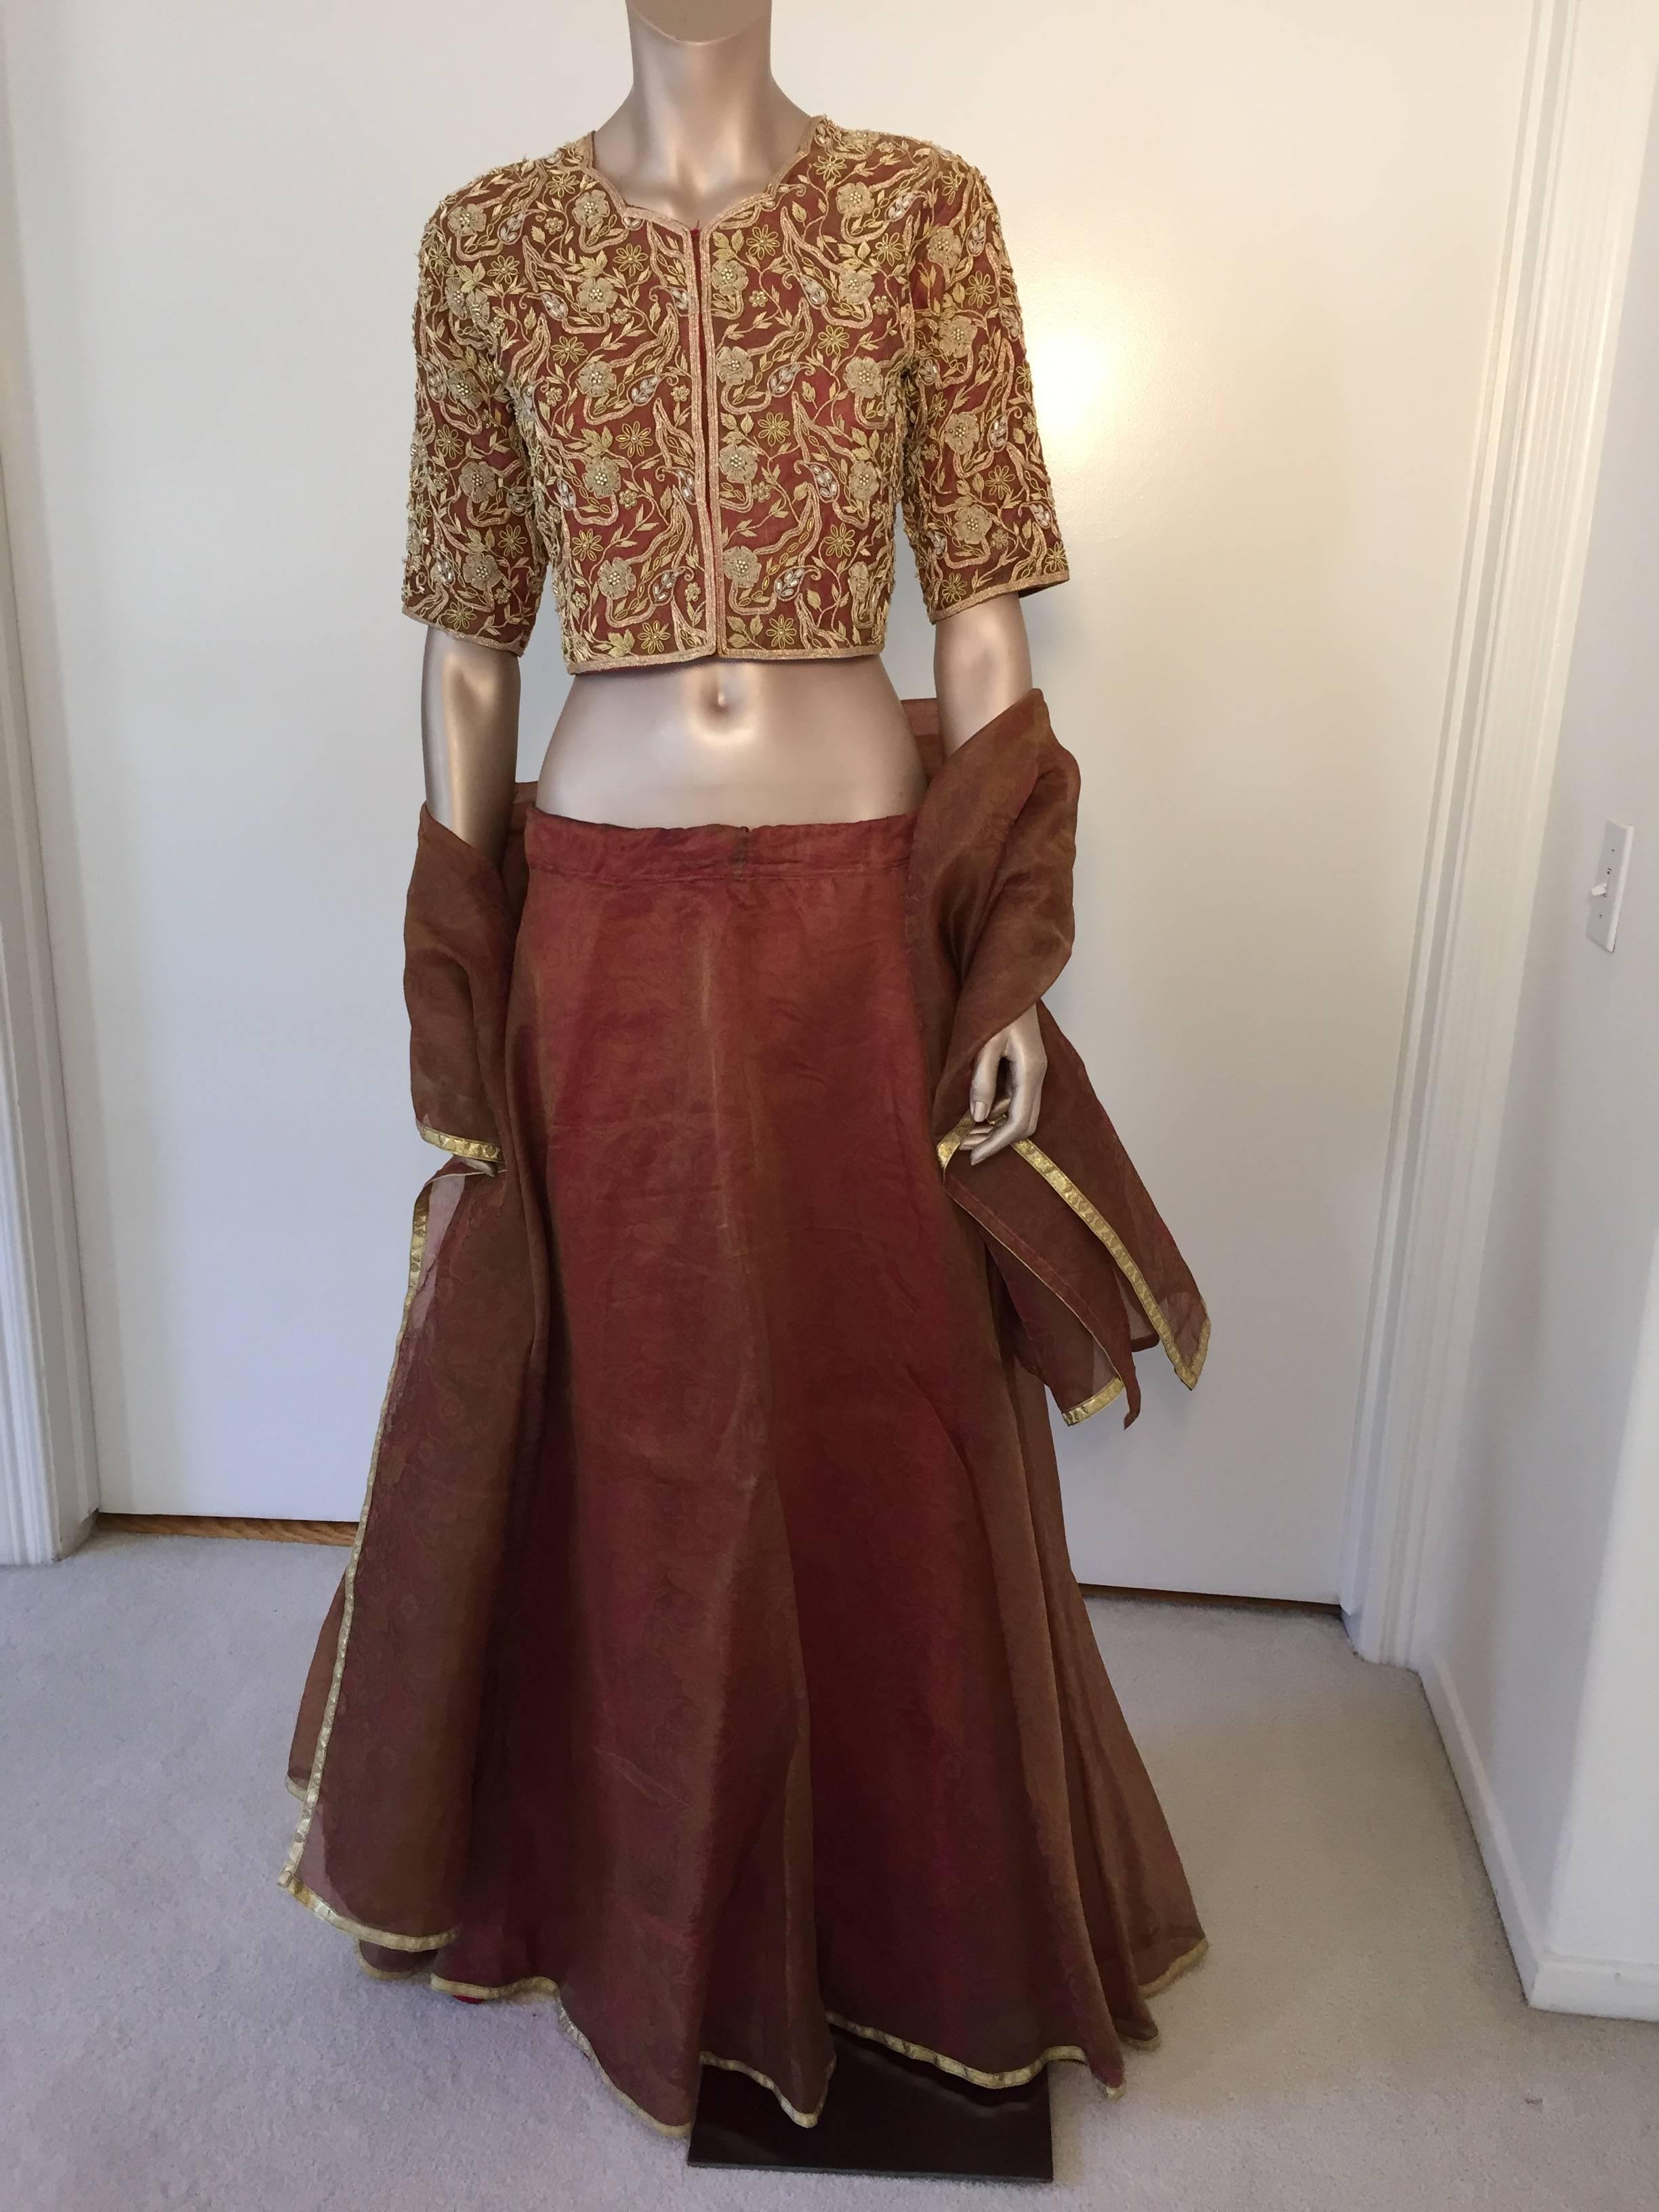 Amazing vintage Bollywood star silk sari custom designer beaded gown.
Classy brocade blouse embroidered with pearl and metallic threads with 
extensive bead work, appliqué and embellished with a veritable treasure Trove of sequins and beads with